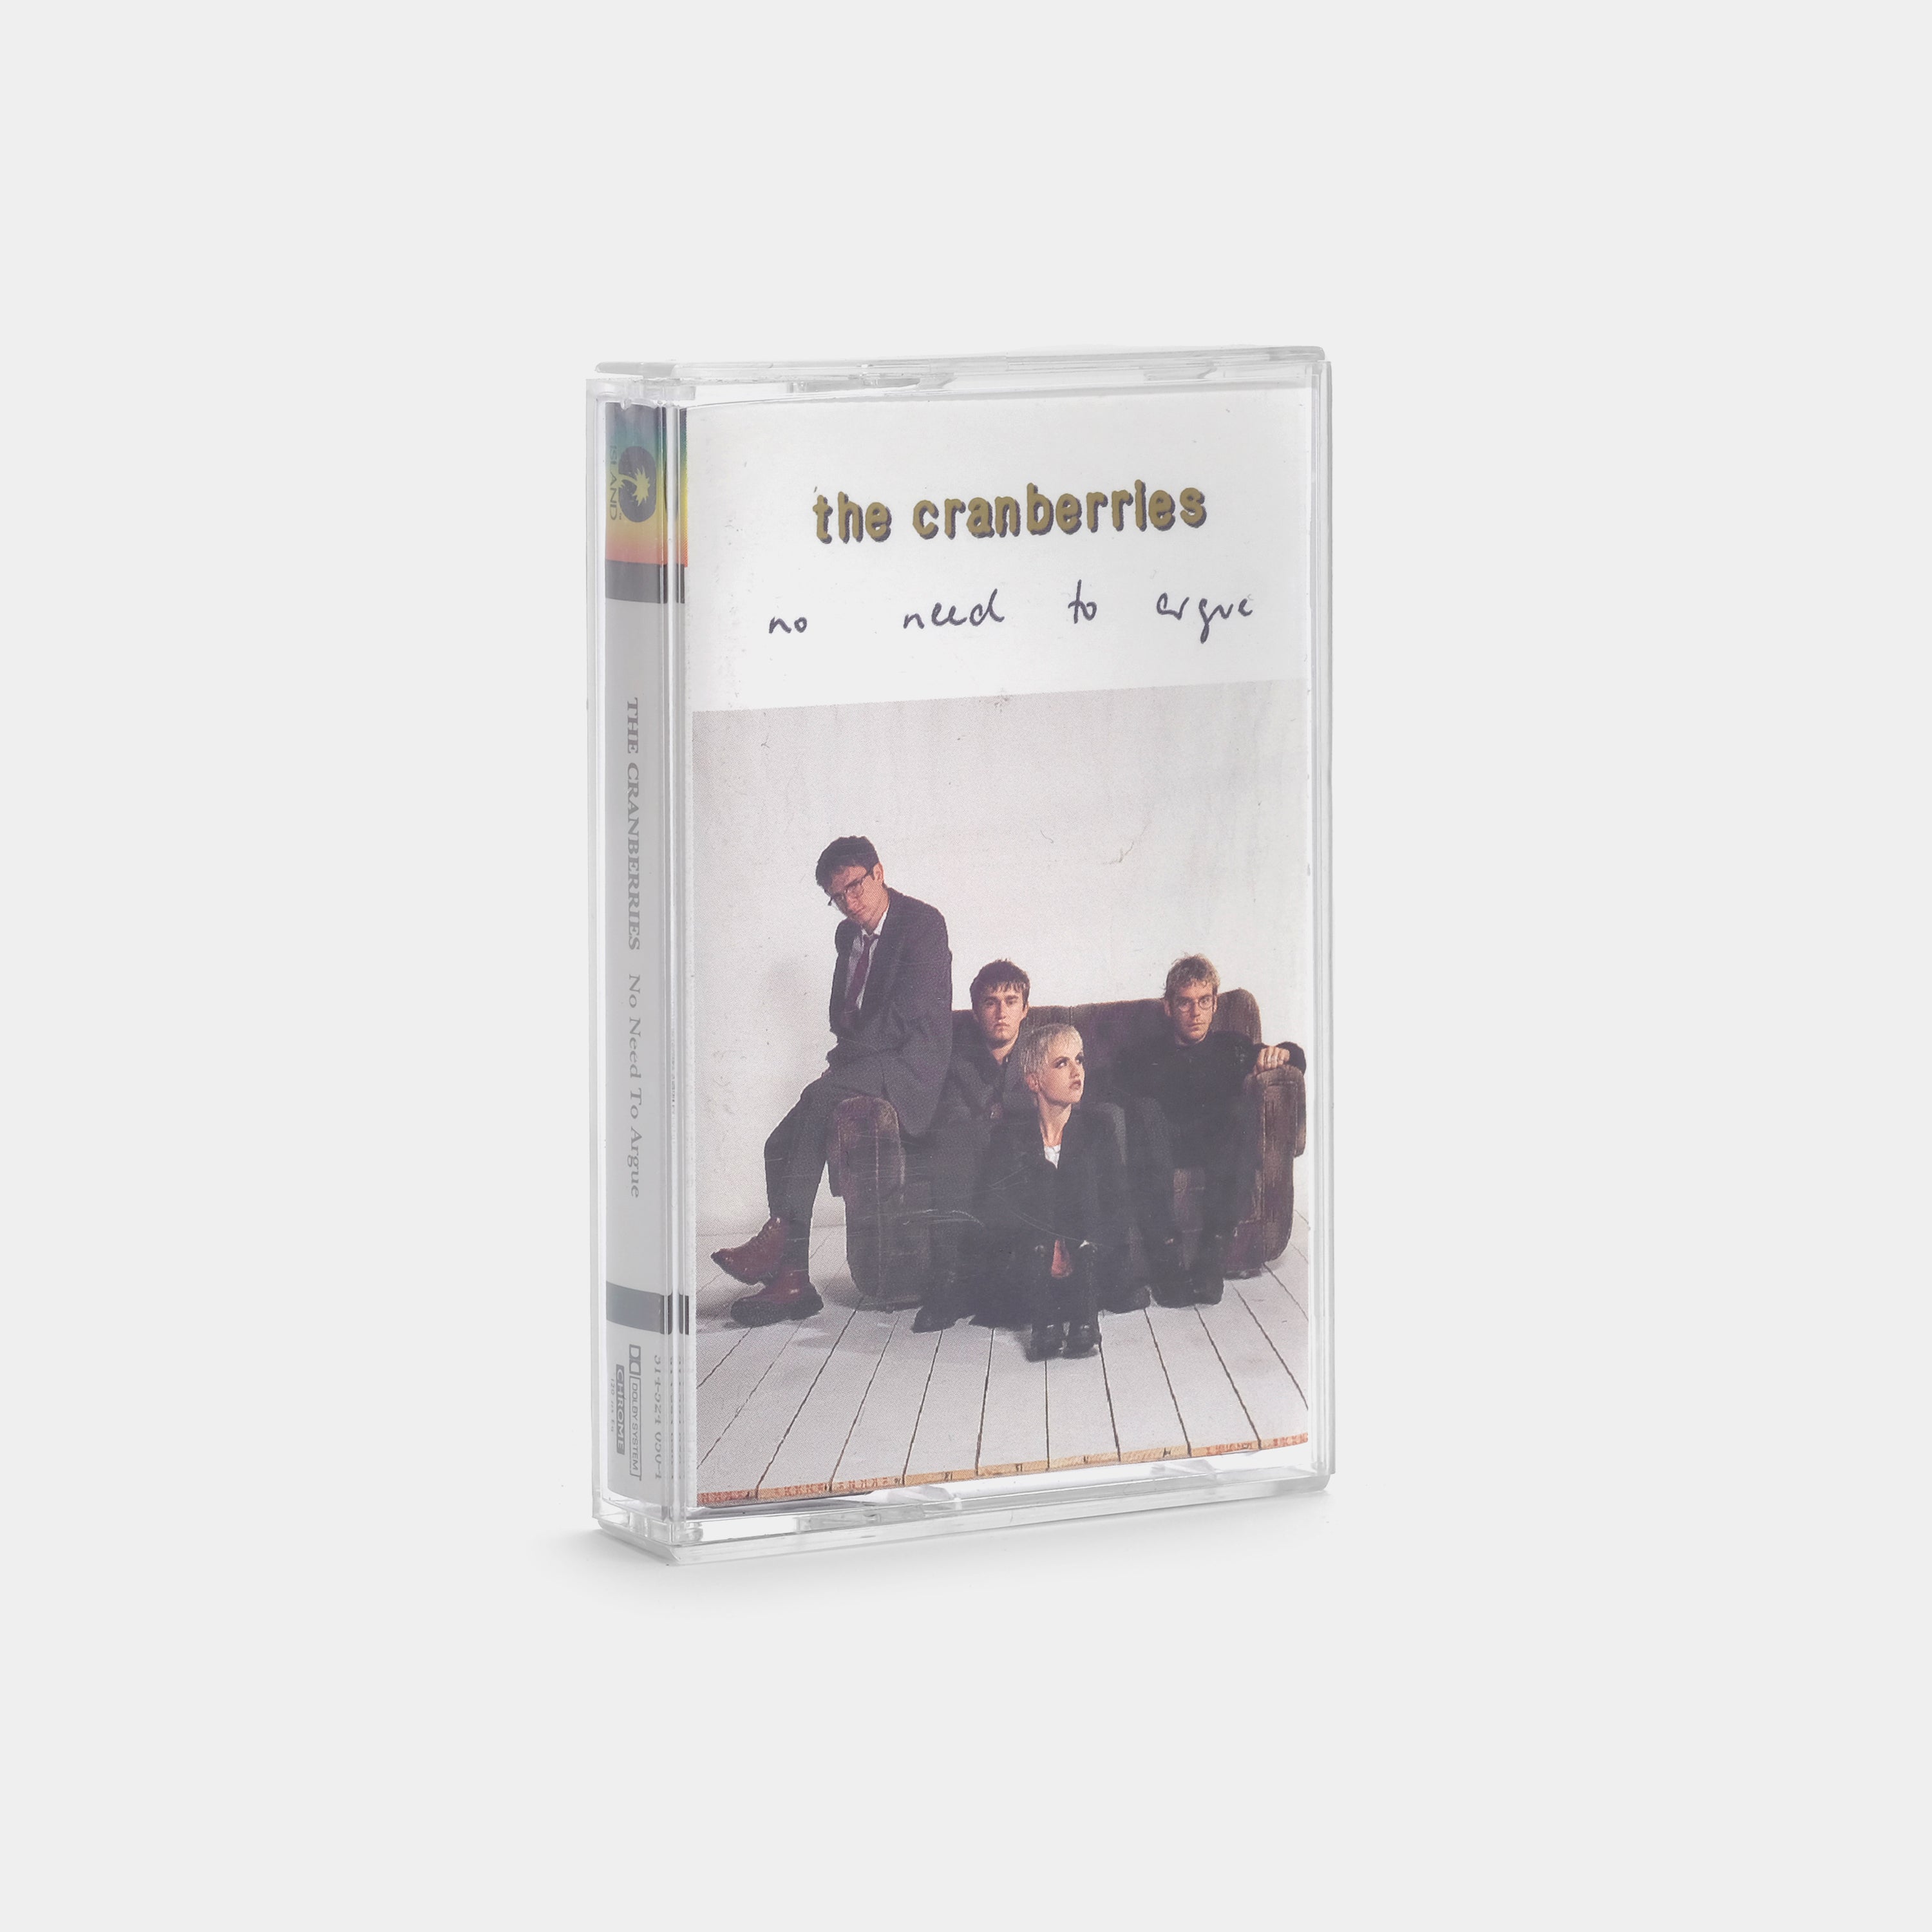 The Cranberries - No Need To Argue Cassette Tape